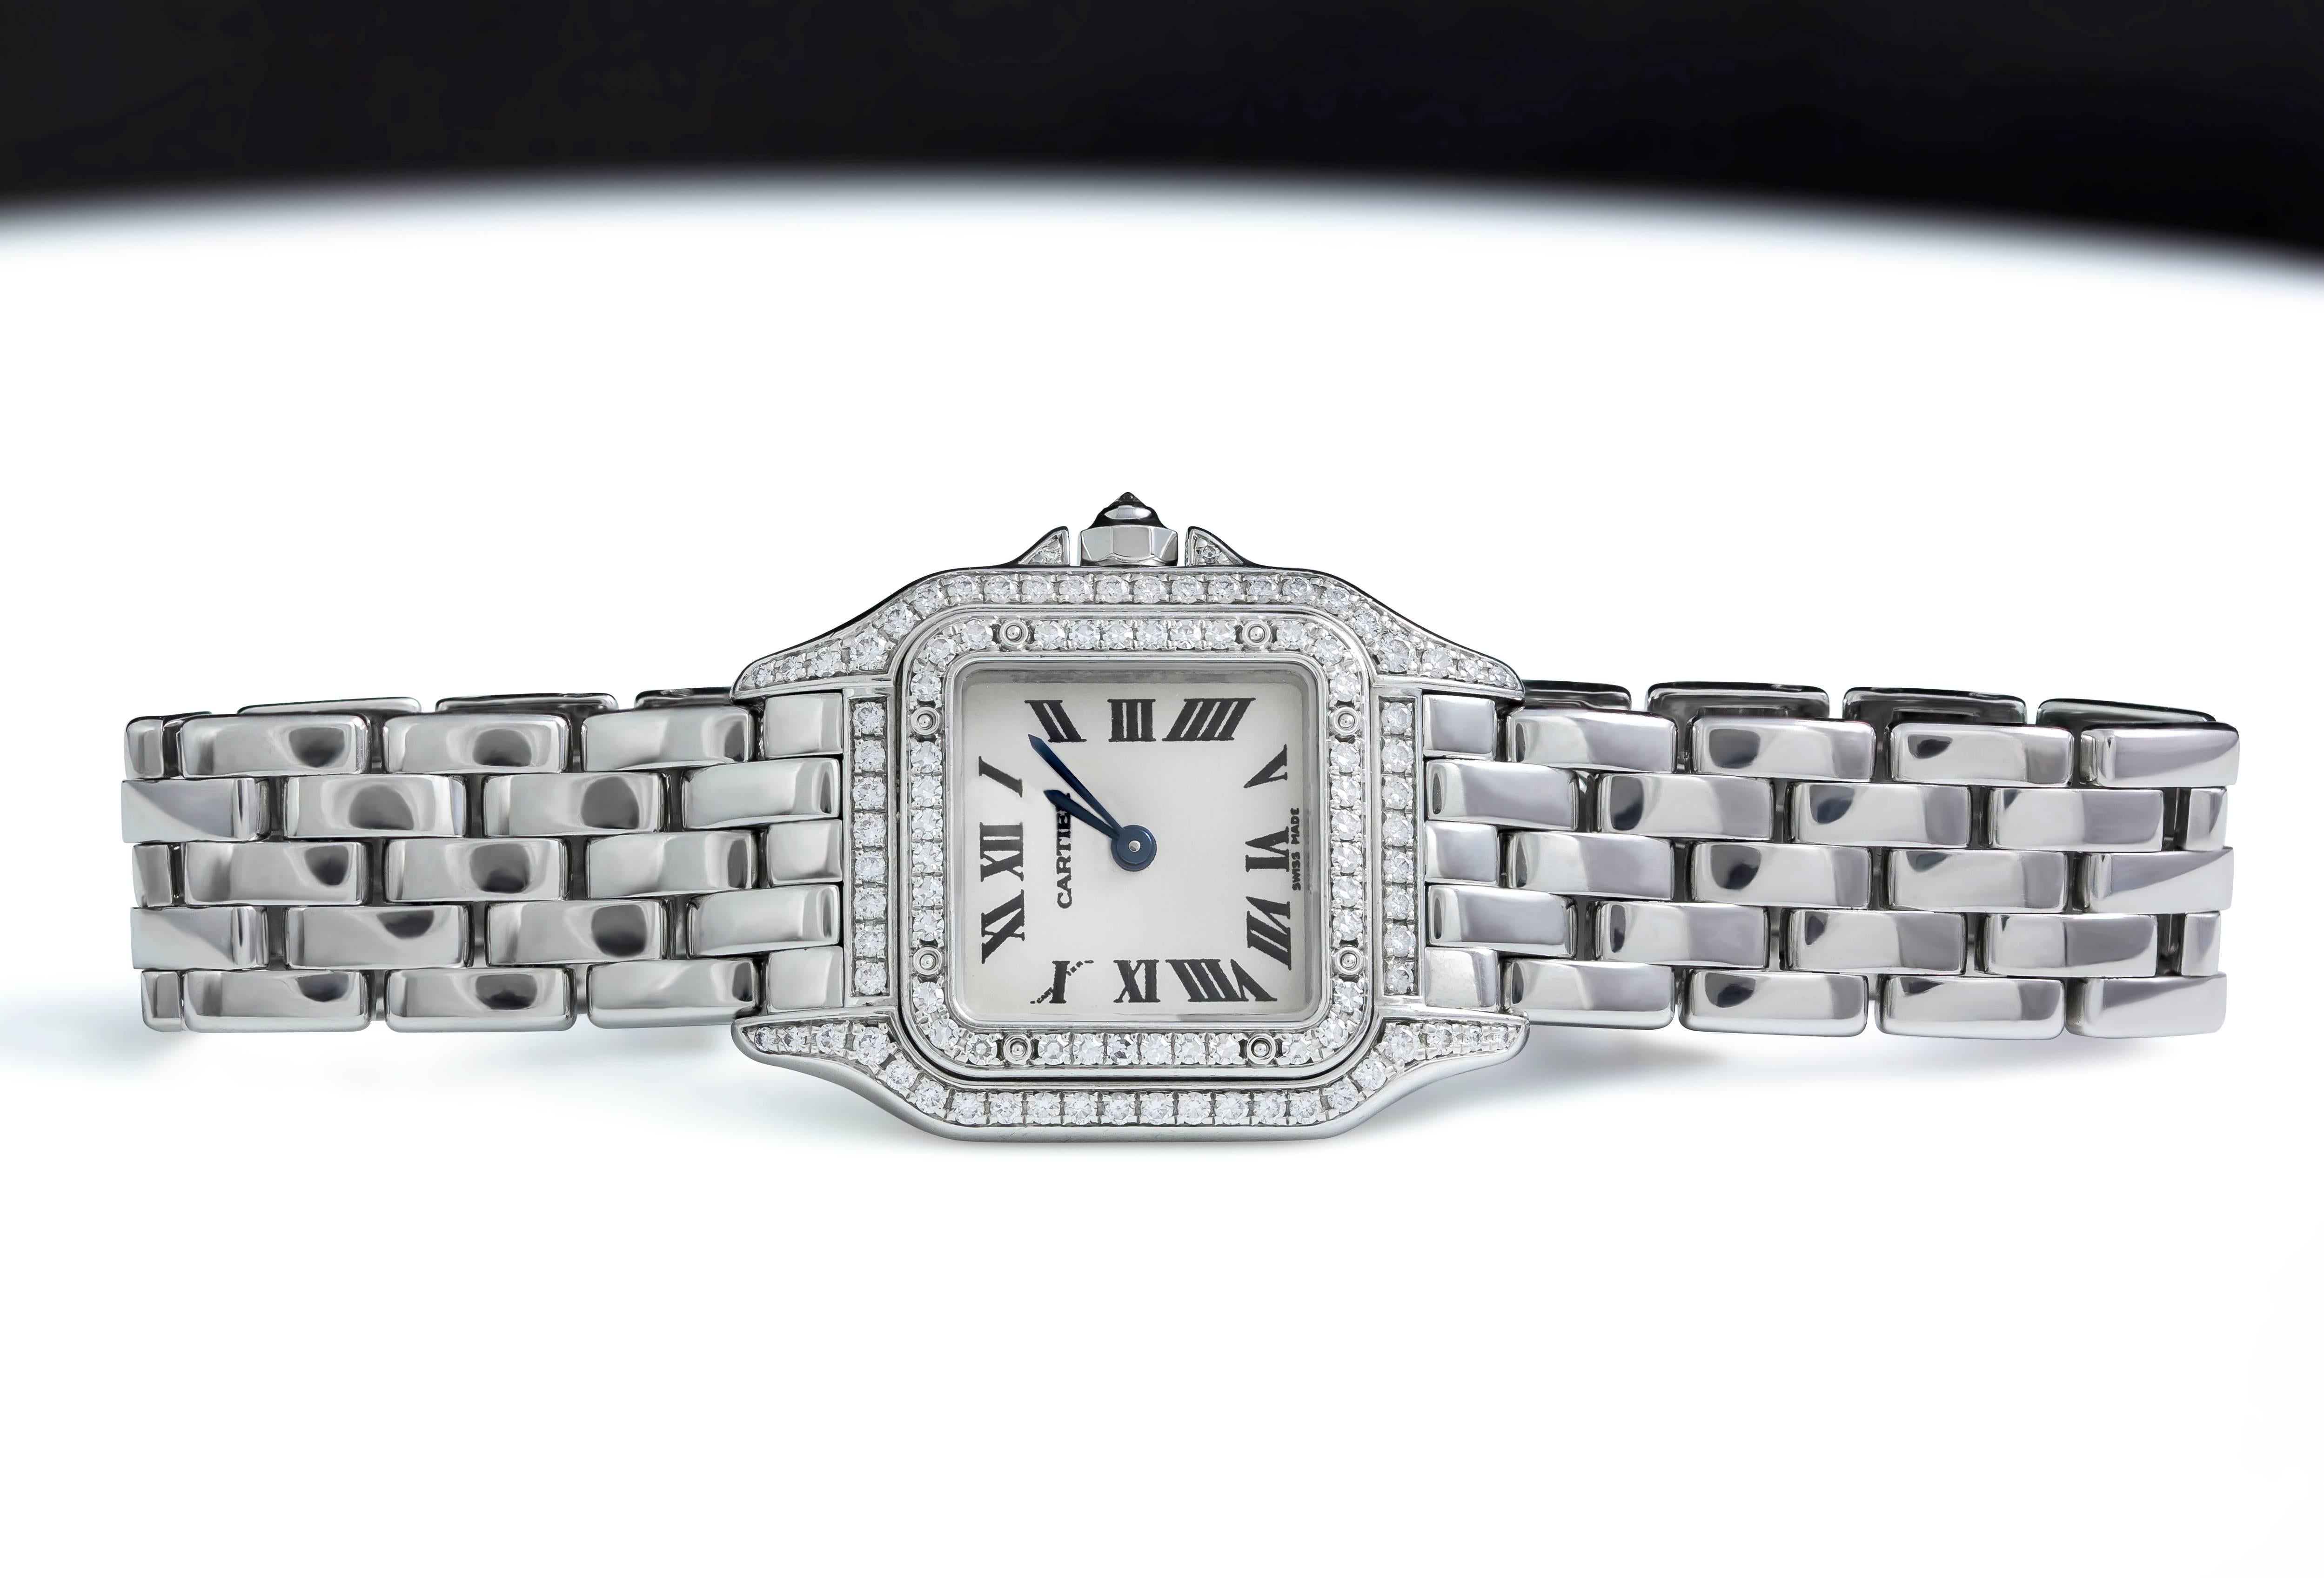 A small classic ladies wristwatch made and signed by Cartier (ref: 1660). Features a classic Roman Dial with blue steel hands set in a solid 18k white gold bezel and a 22mm x 30mm diamond encrusted case. A single round diamond set on the crown and